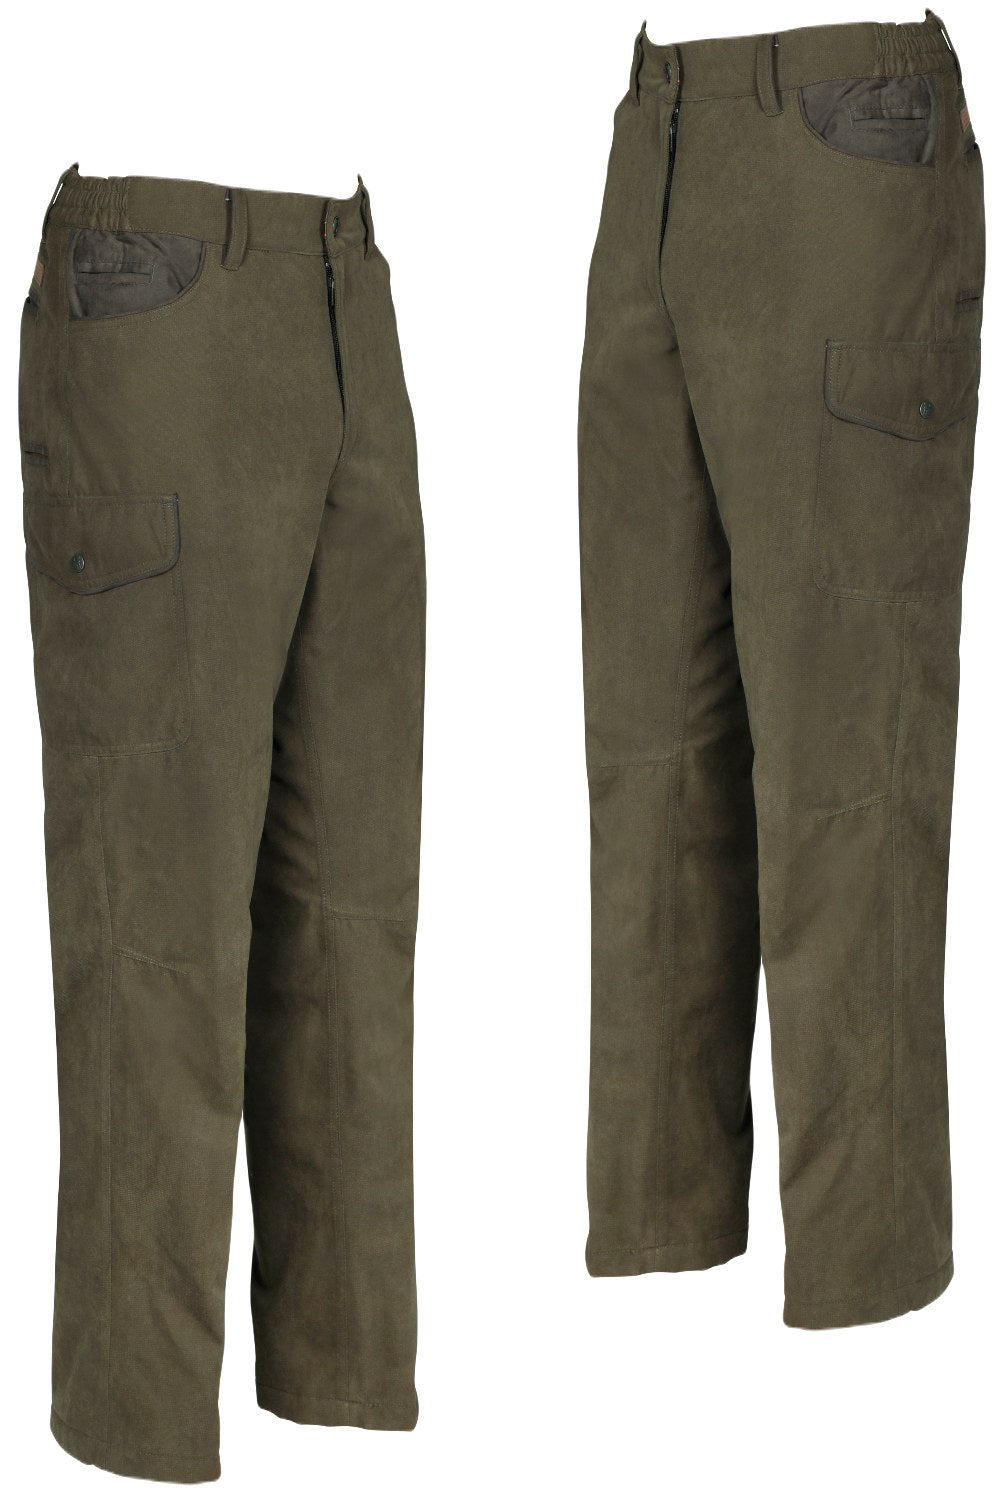 Hunter Xtreme Trouser by Pinewood